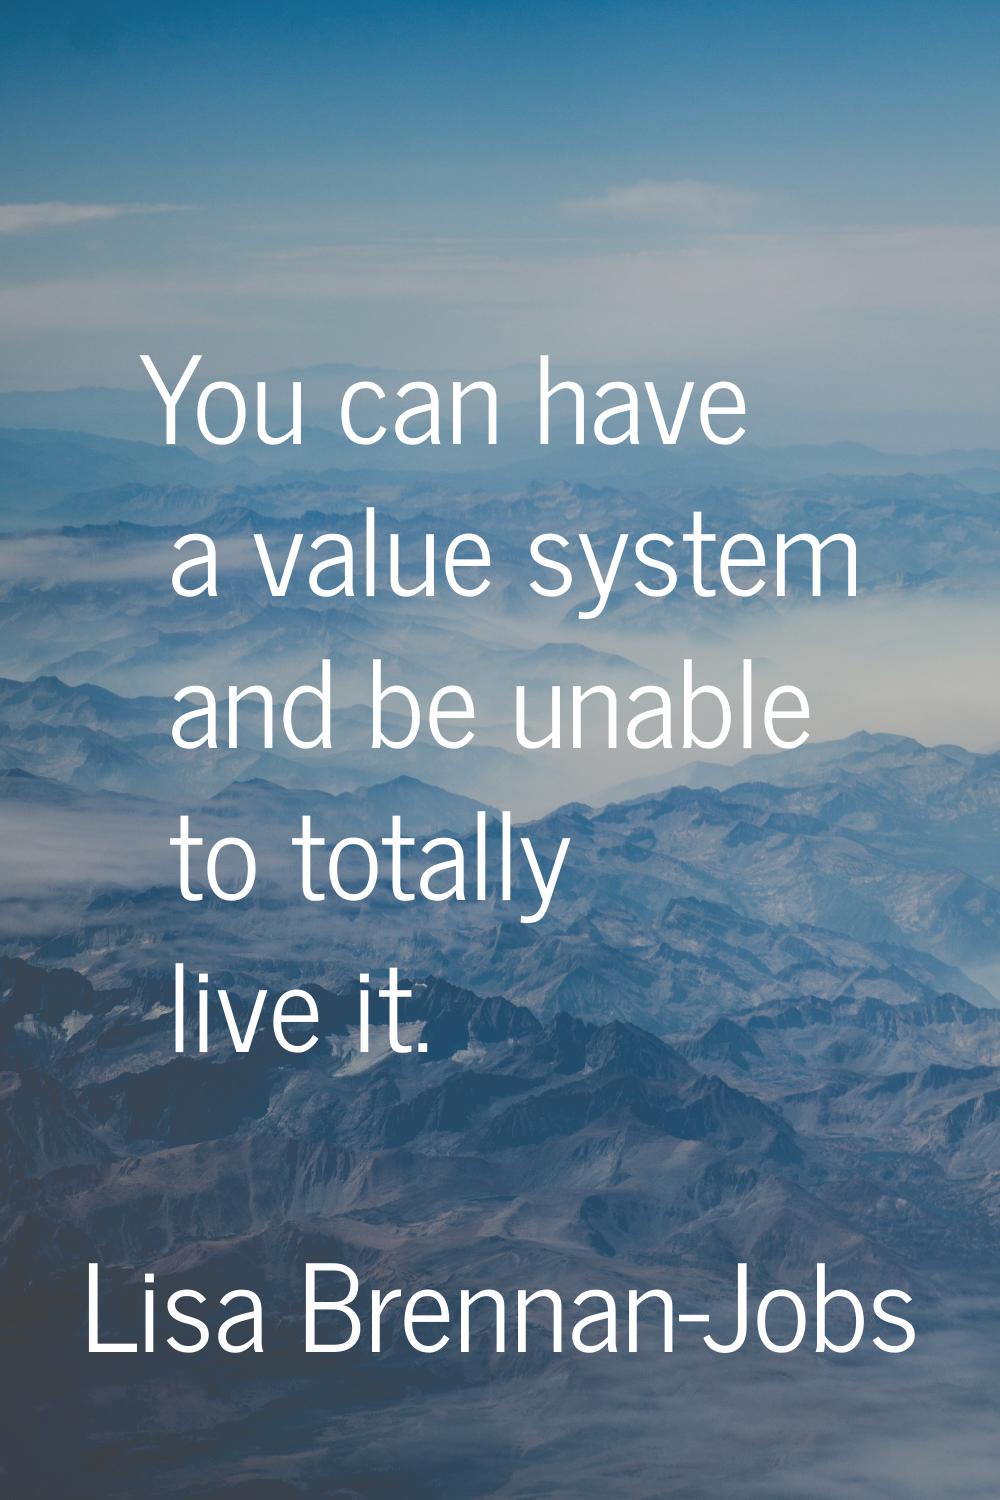 You can have a value system and be unable to totally live it.